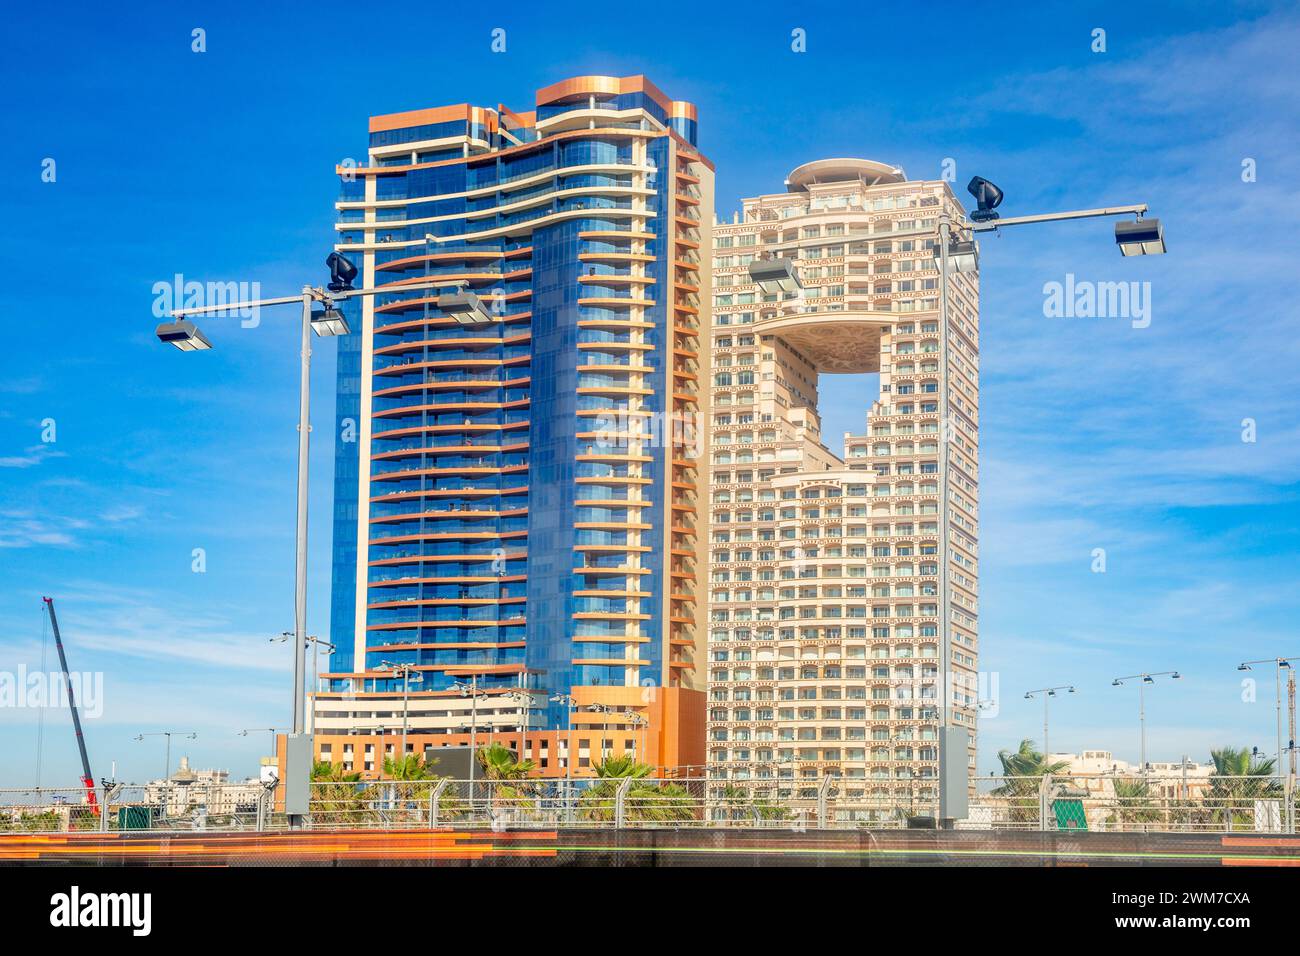 Residential and business buildings at the corniche with race track street lights in the foreground, Jeddah, Saudi Arabia Stock Photo